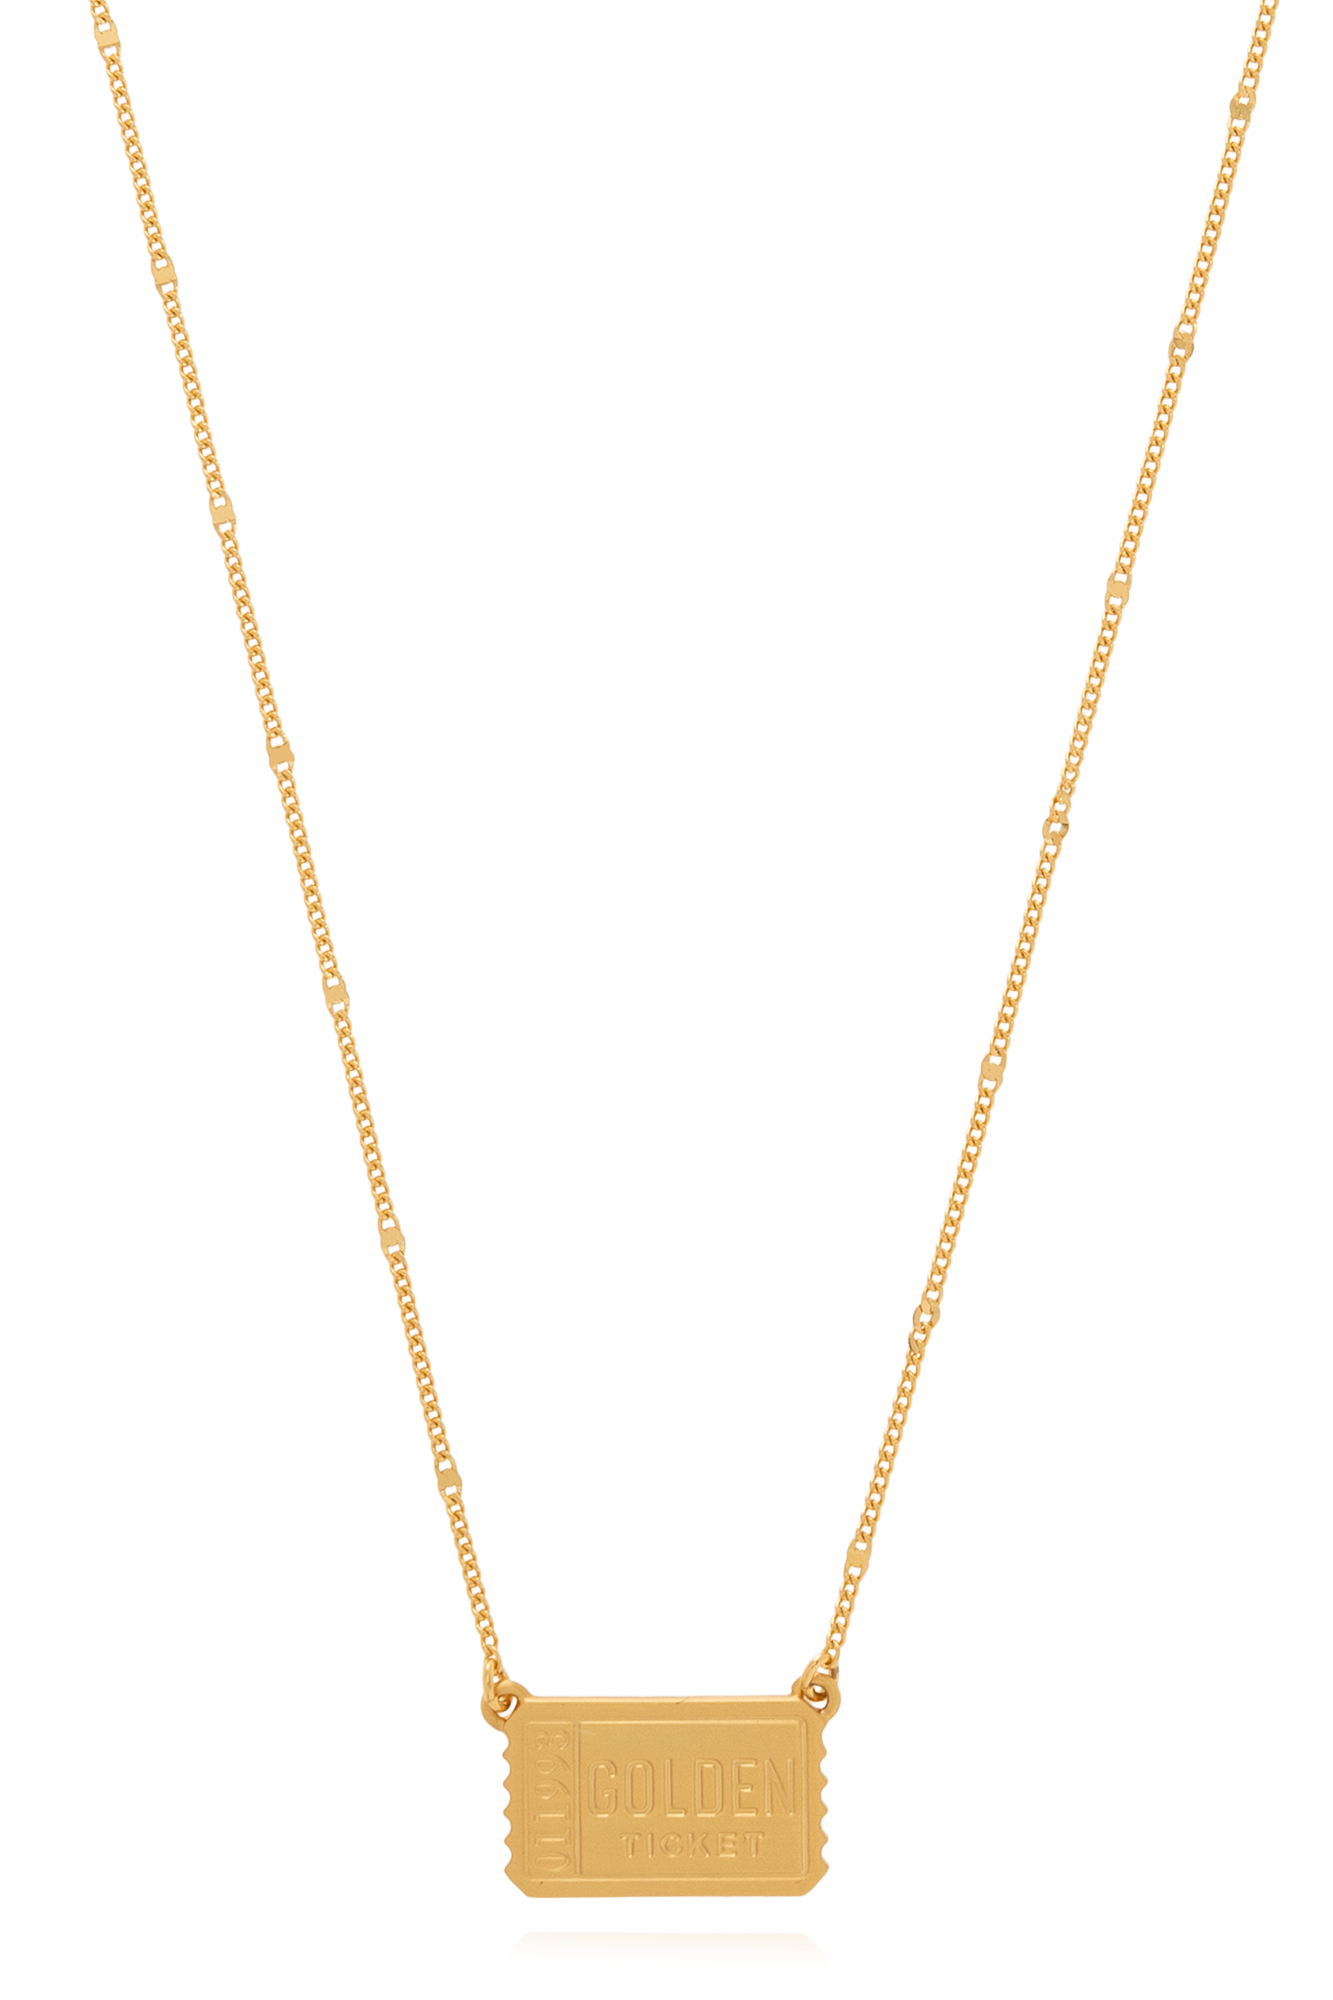 Kate Spade 'Winter Carnival' collection necklace | Women's